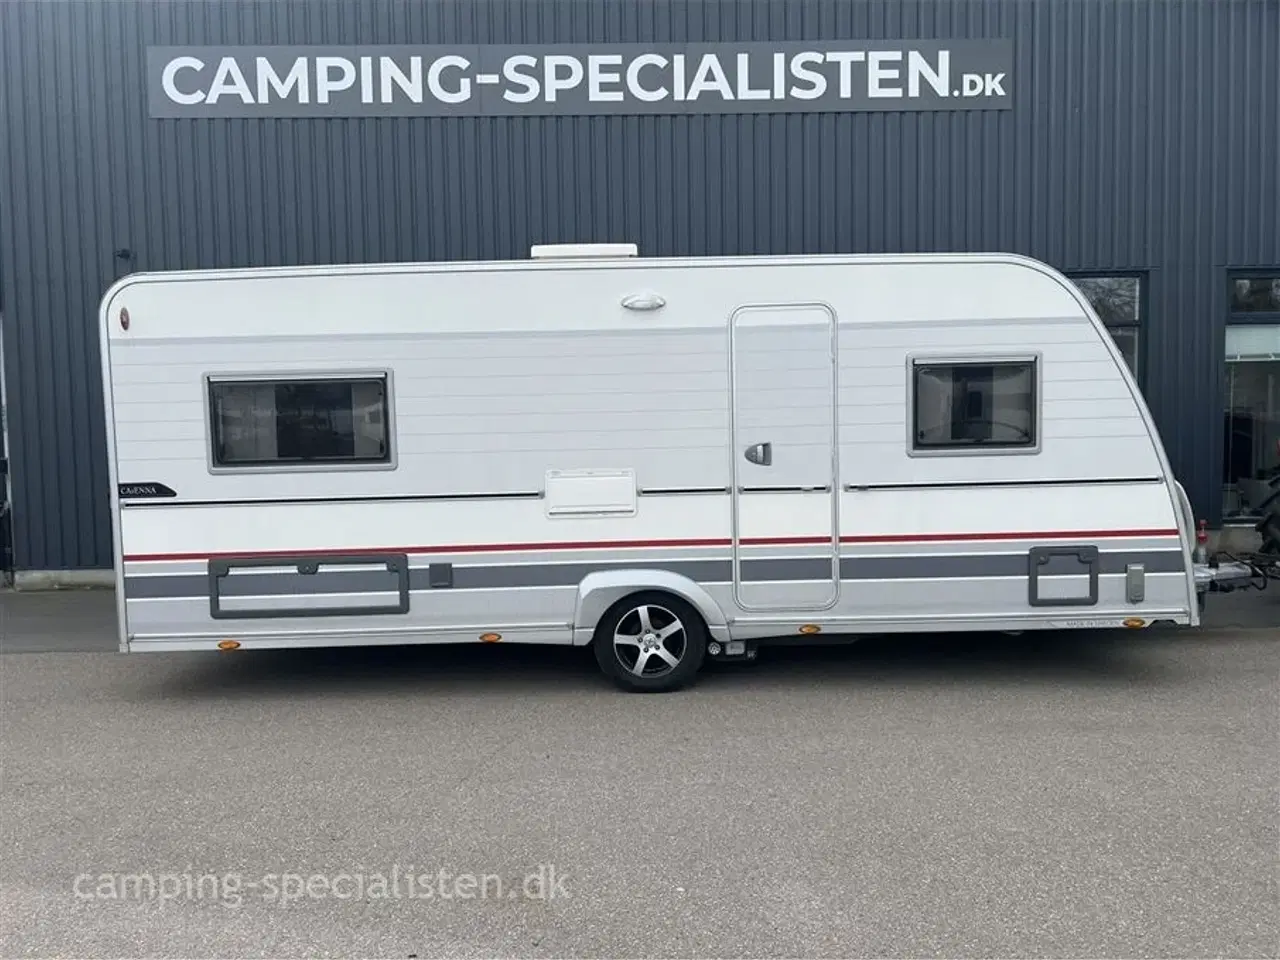 Billede 1 - 2014 - Cabby Caienna 620 F3   2014 Cabby Caienna 620 F3 - se den nu hos Camping-Specialisten i Aarhus.